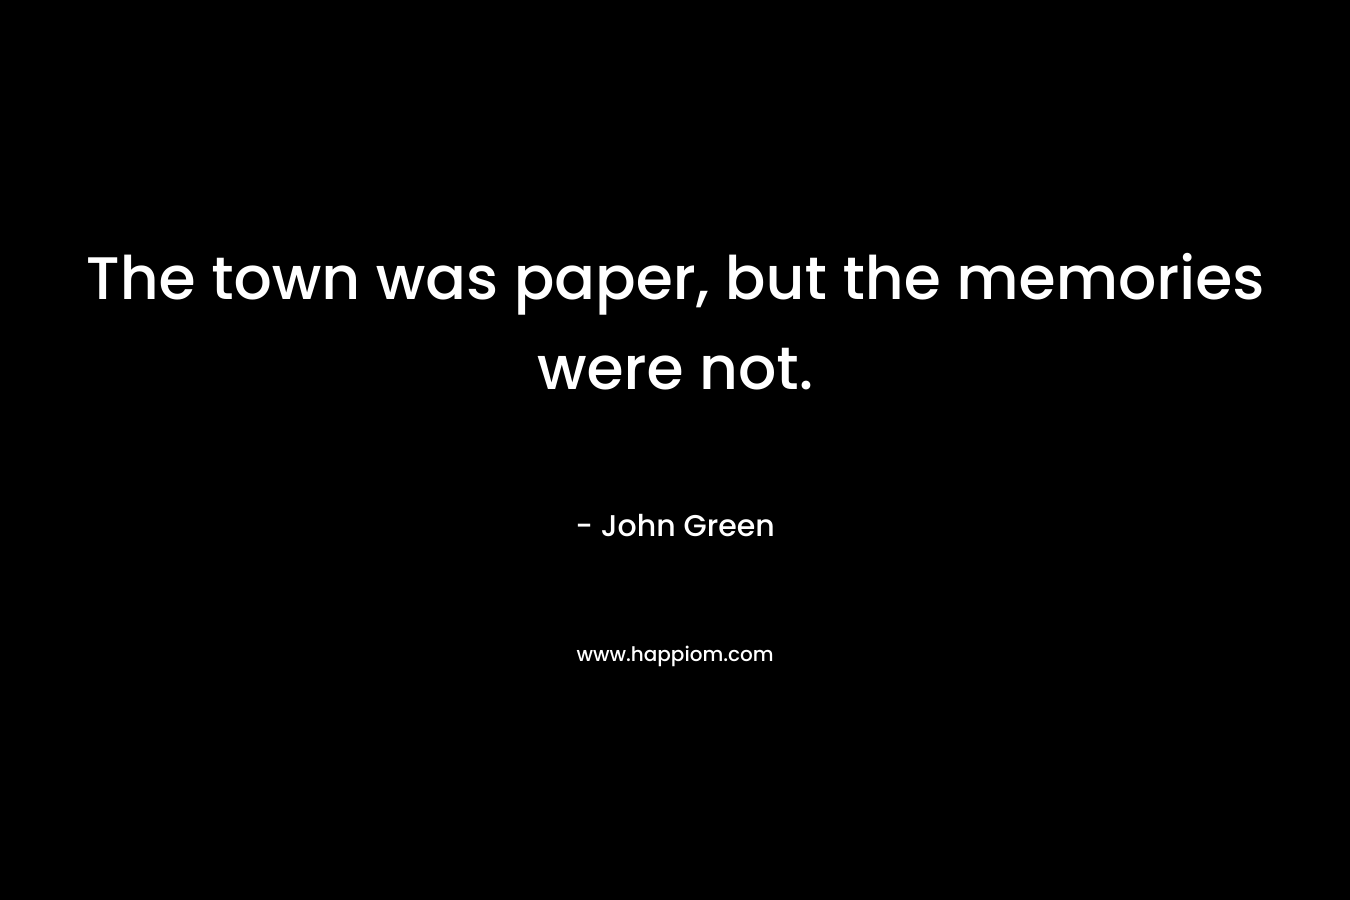 The town was paper, but the memories were not.